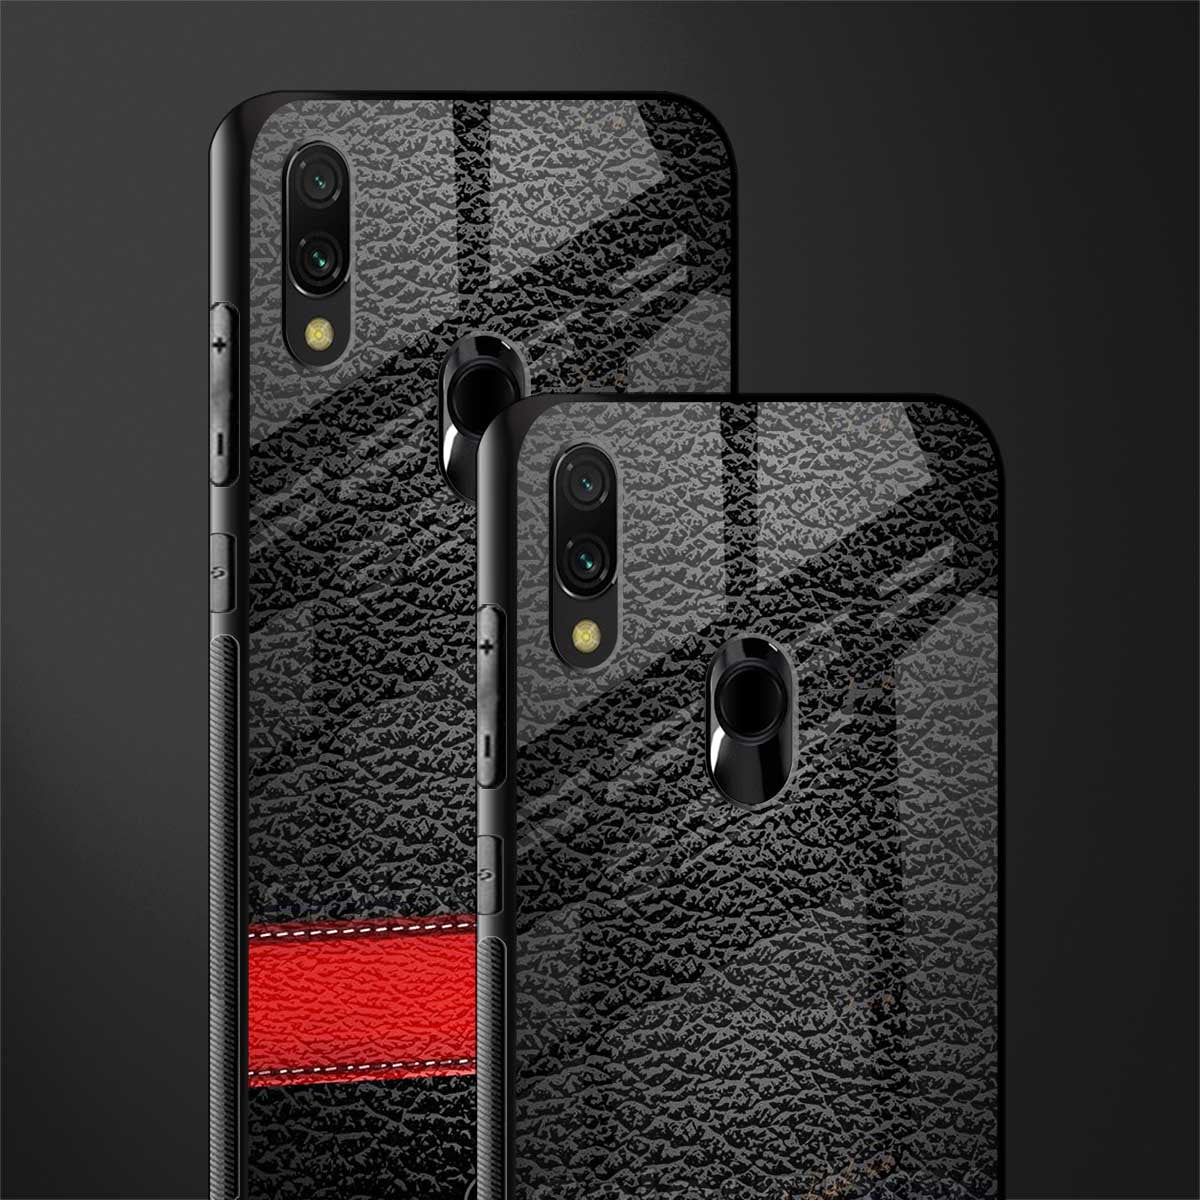 reaper's touch glass case for redmi note 7 pro image-2